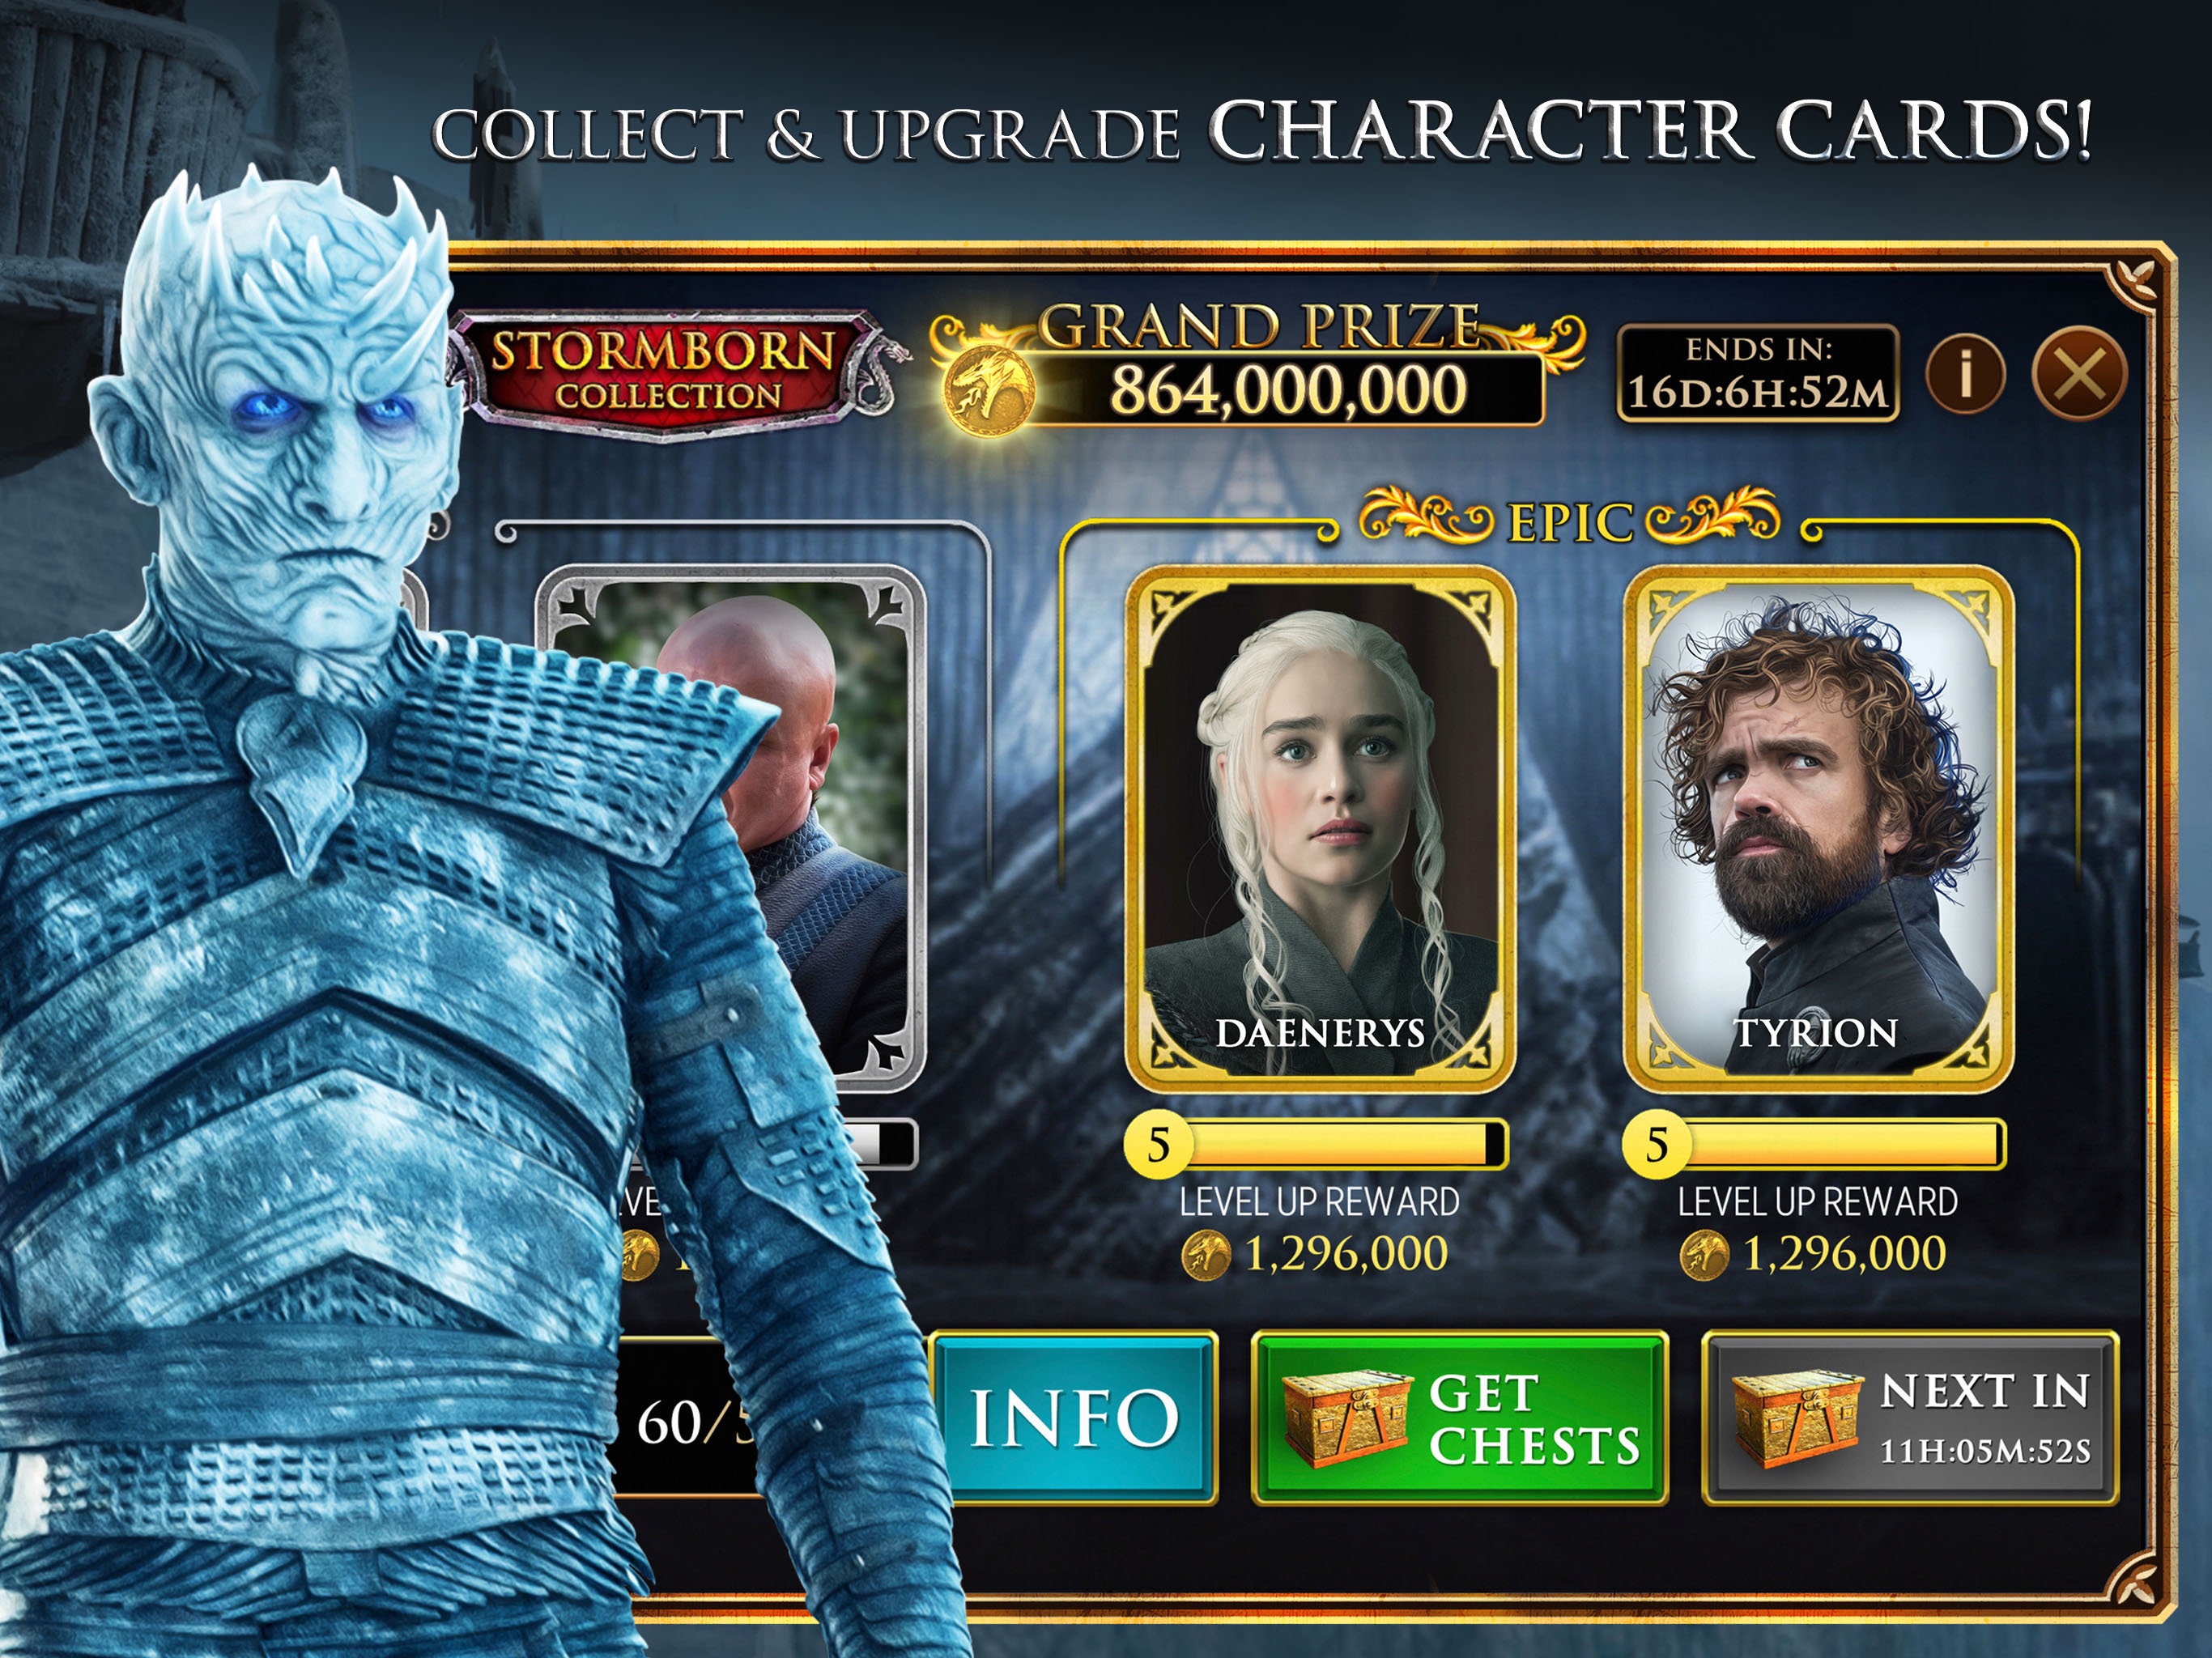 Game Of Thrones Slots Casino Free Coins